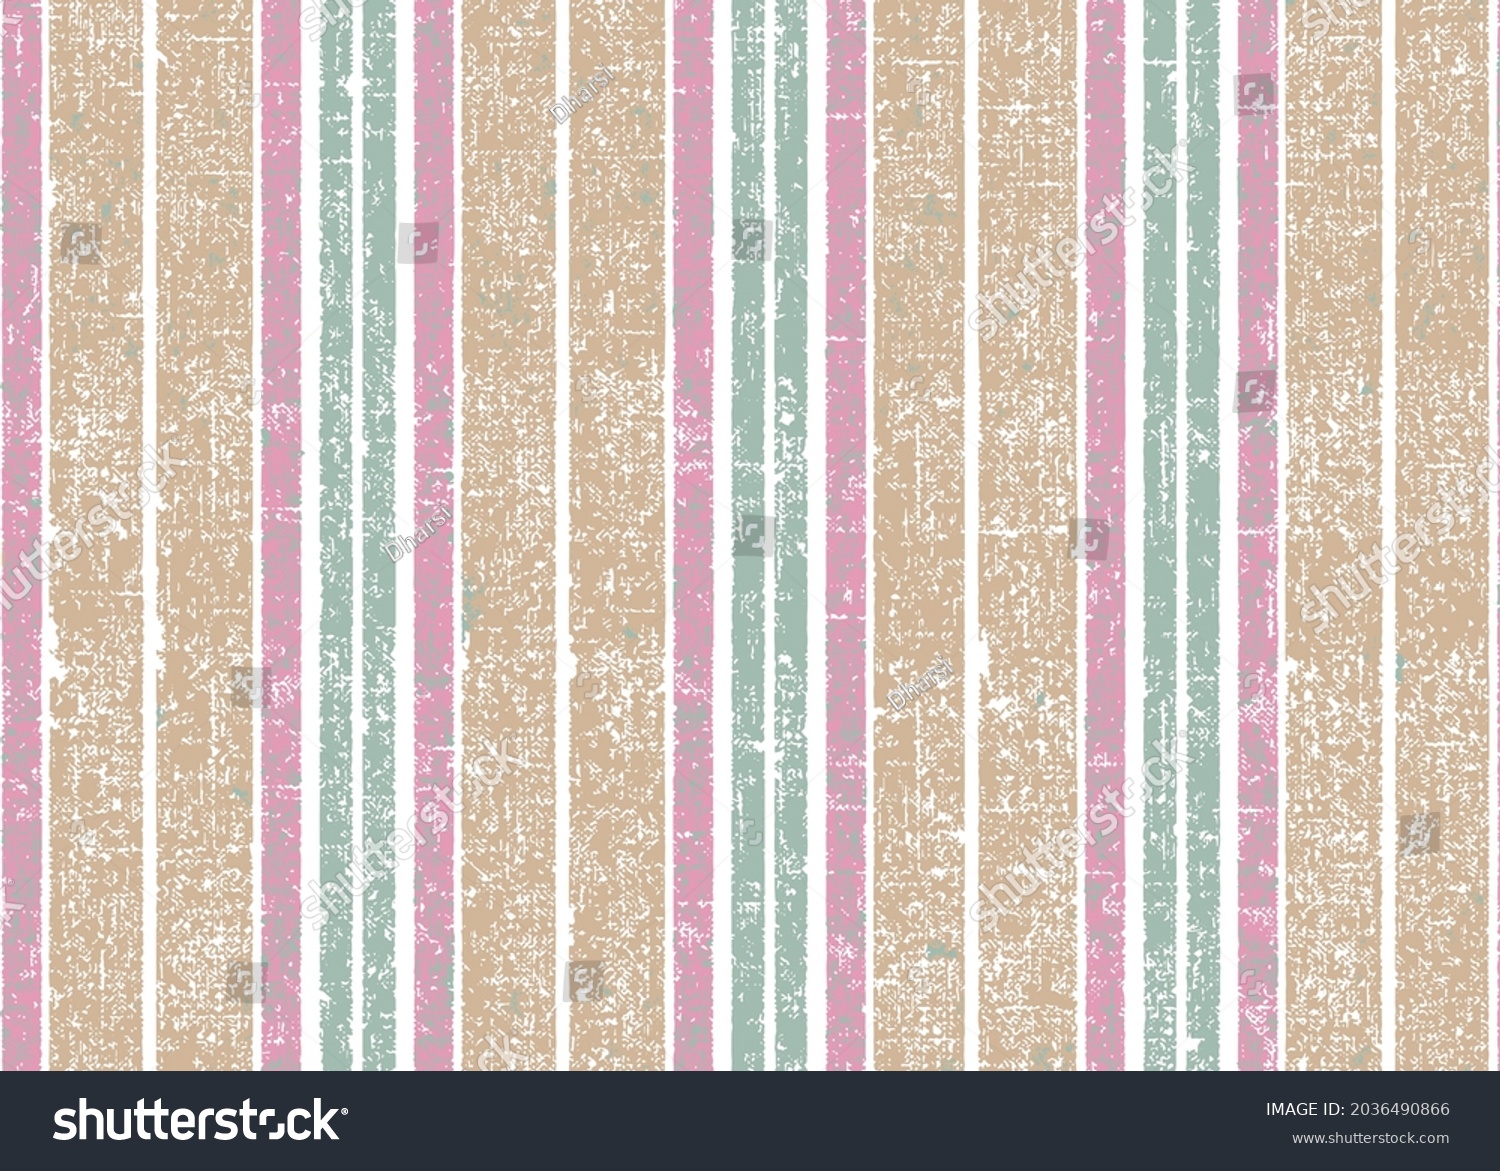 Abstract Striped Slub Textured Seamless Pattern Stock Vector (Royalty ...